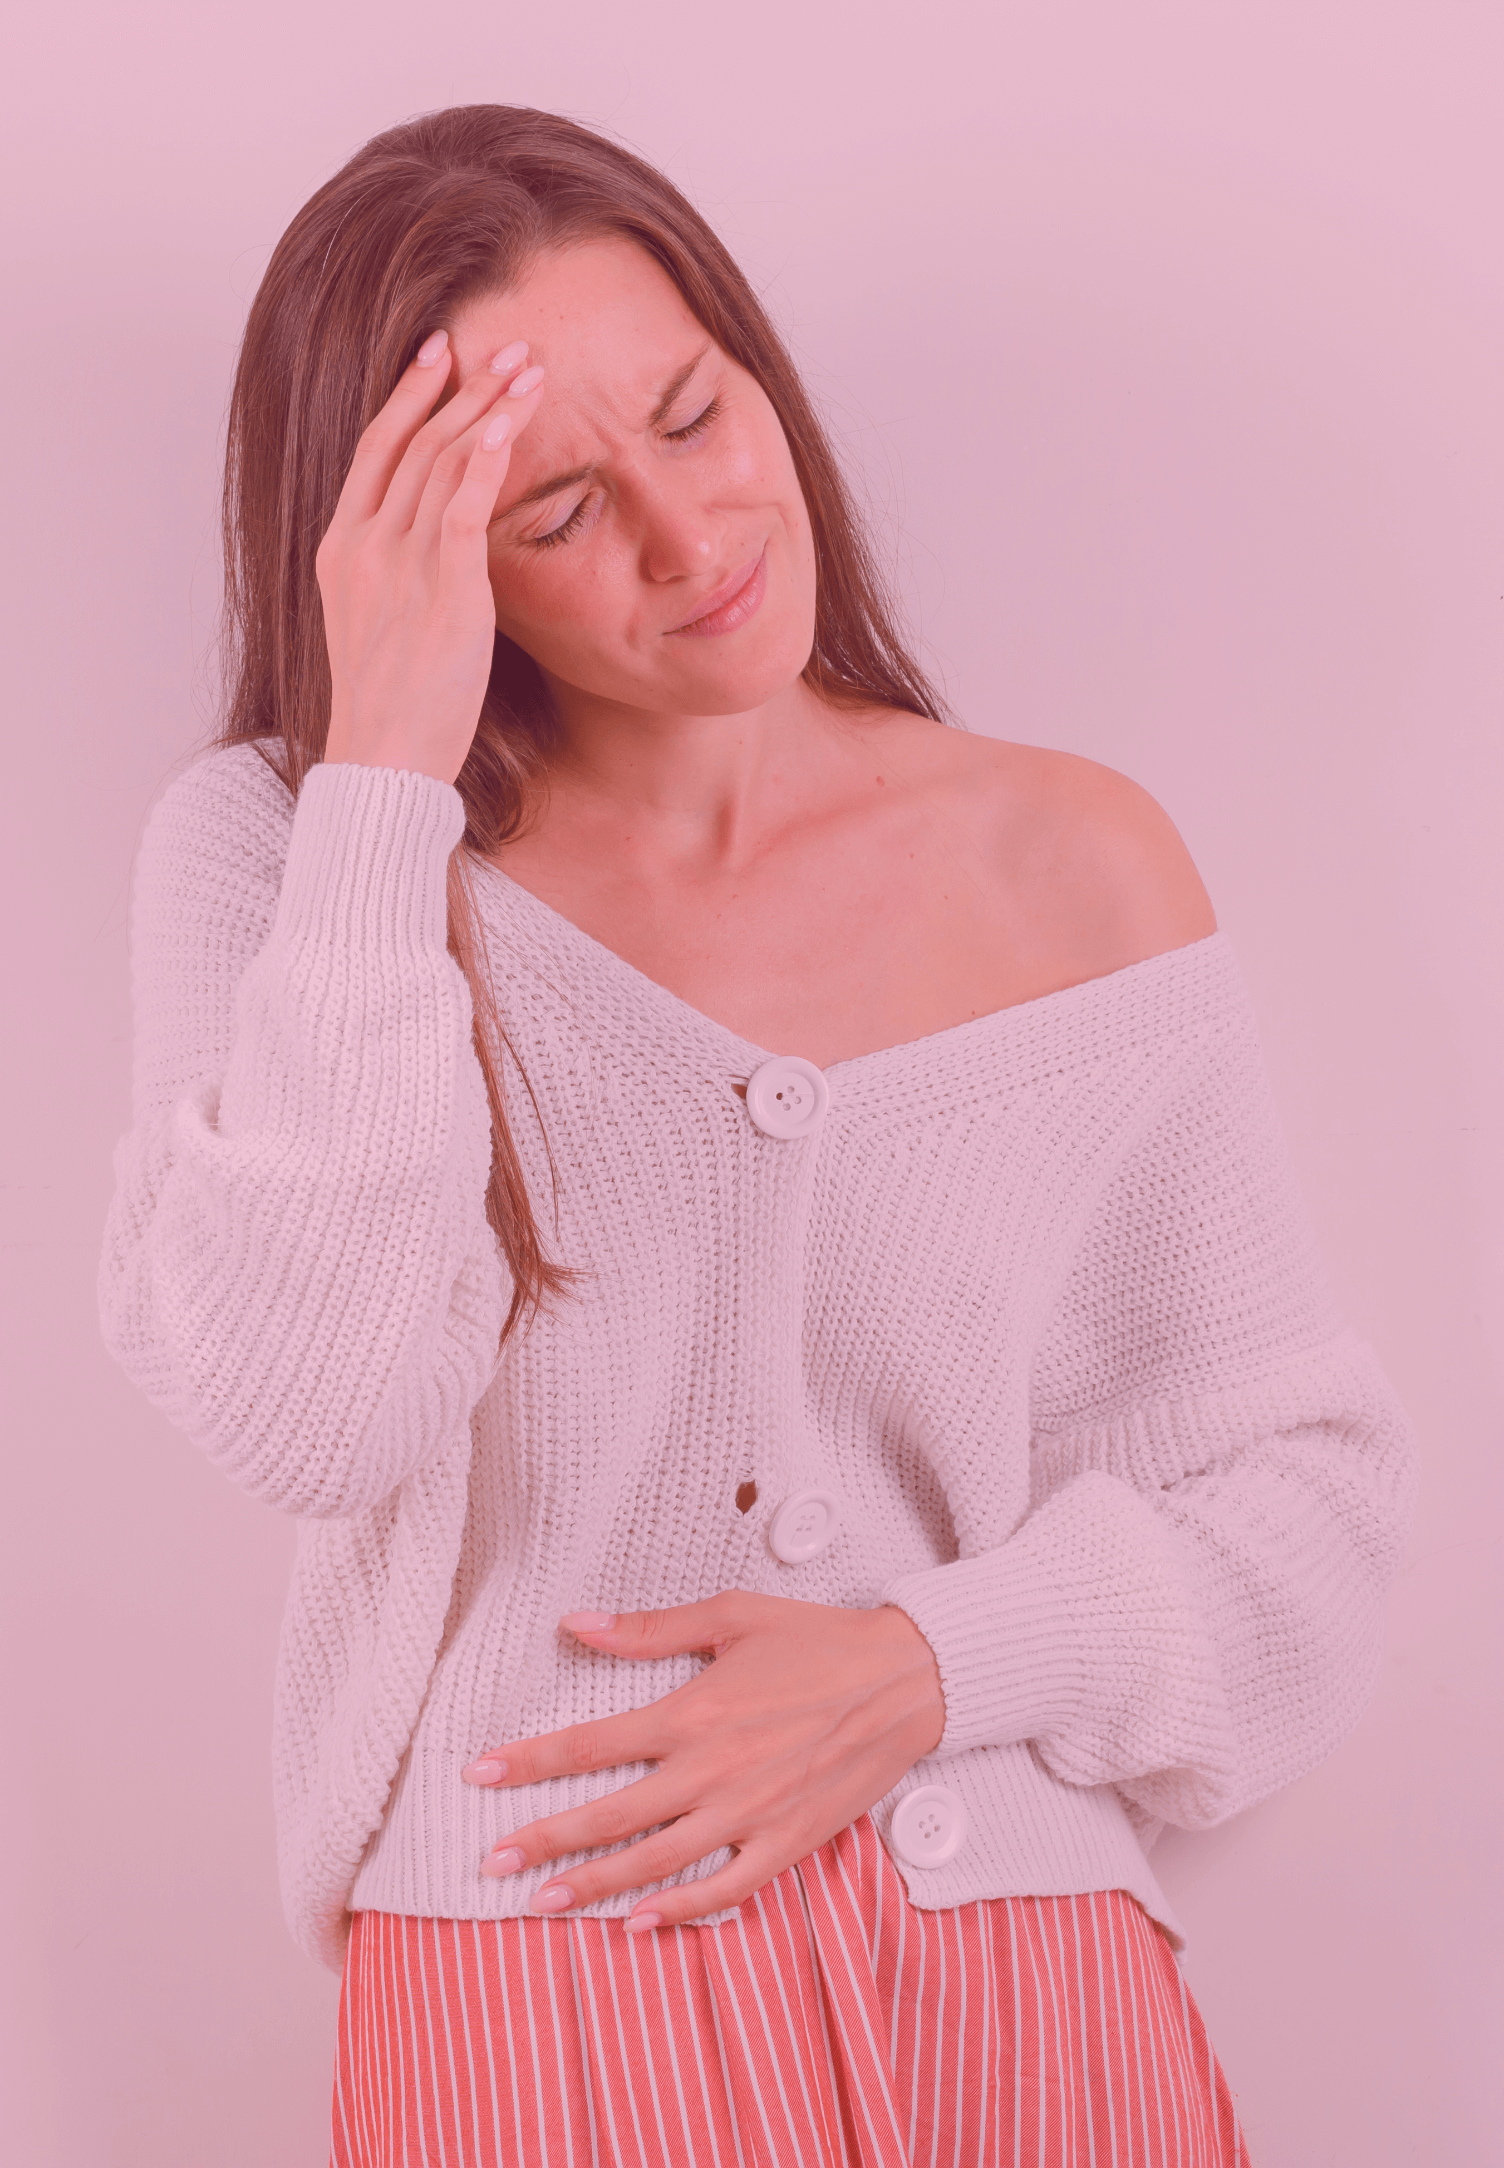 Period Pain | Northside Gynaecology